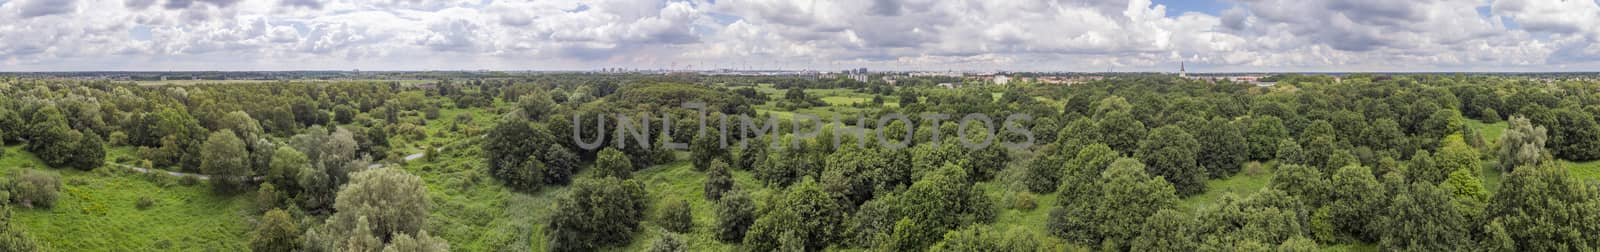 360 aerial panorama over Oude Landen nature park in Ekeren, with village and harbor in the distance. Travel and tourism